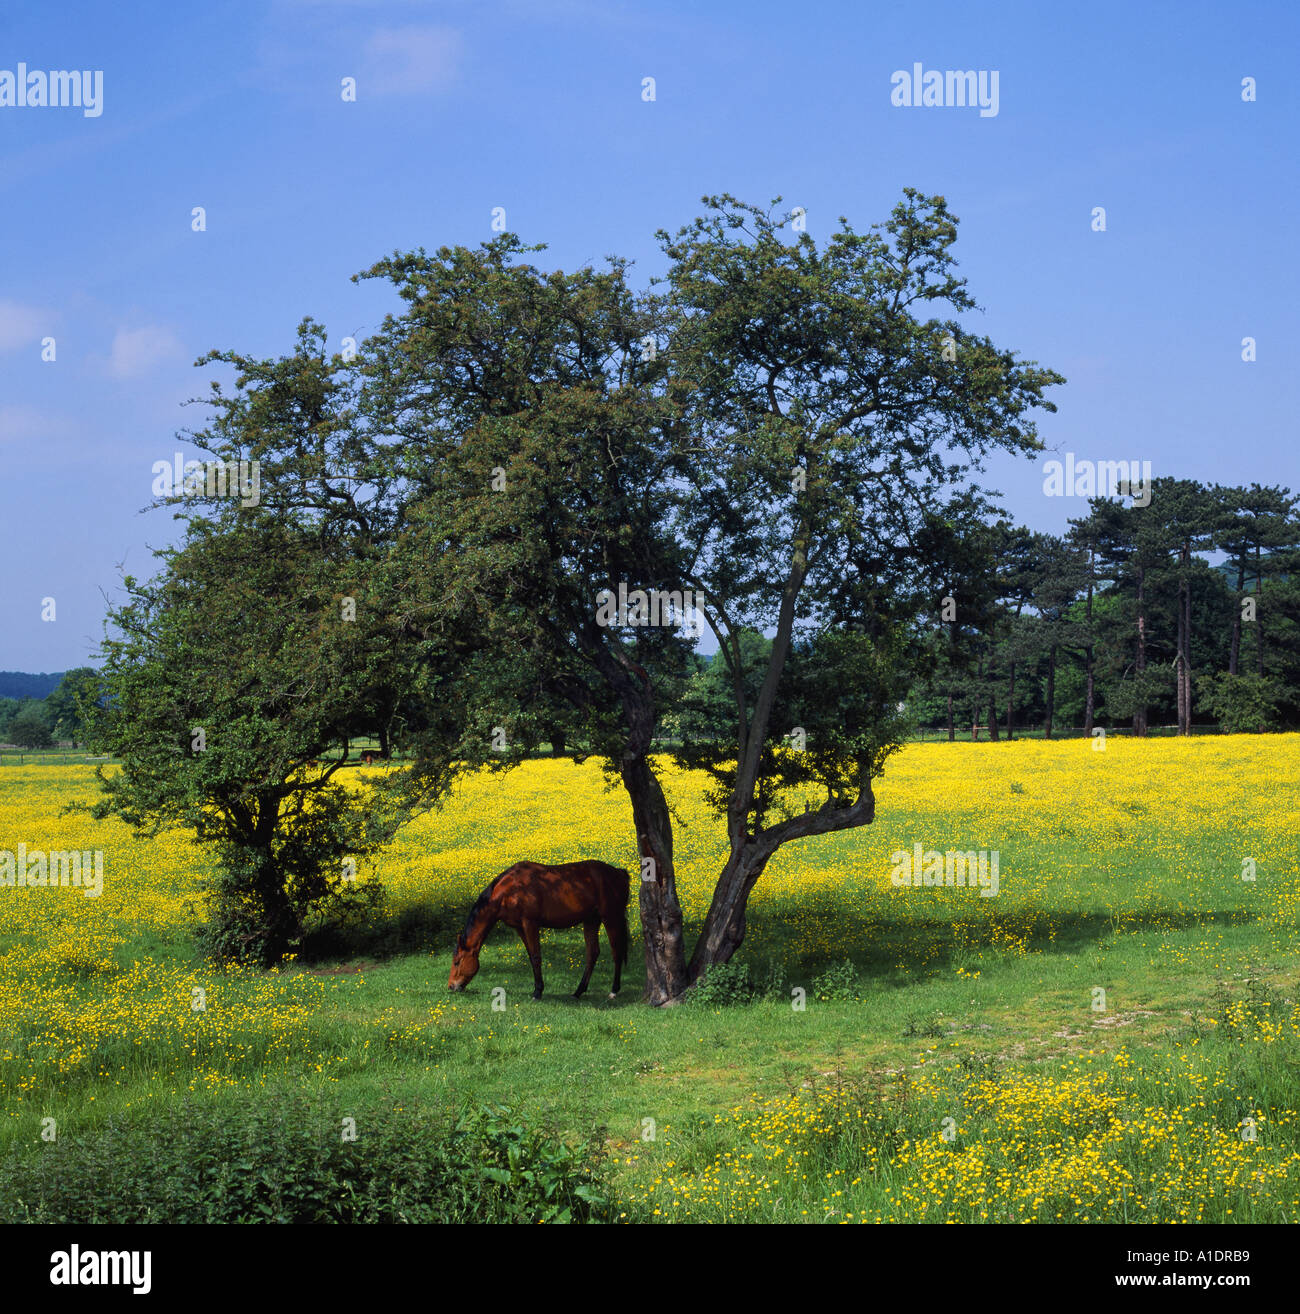 Horse in field of buttercups Duffield nr Derby UK Pictured in summer with dappled sunlight on its back 6x6 Stock Photo